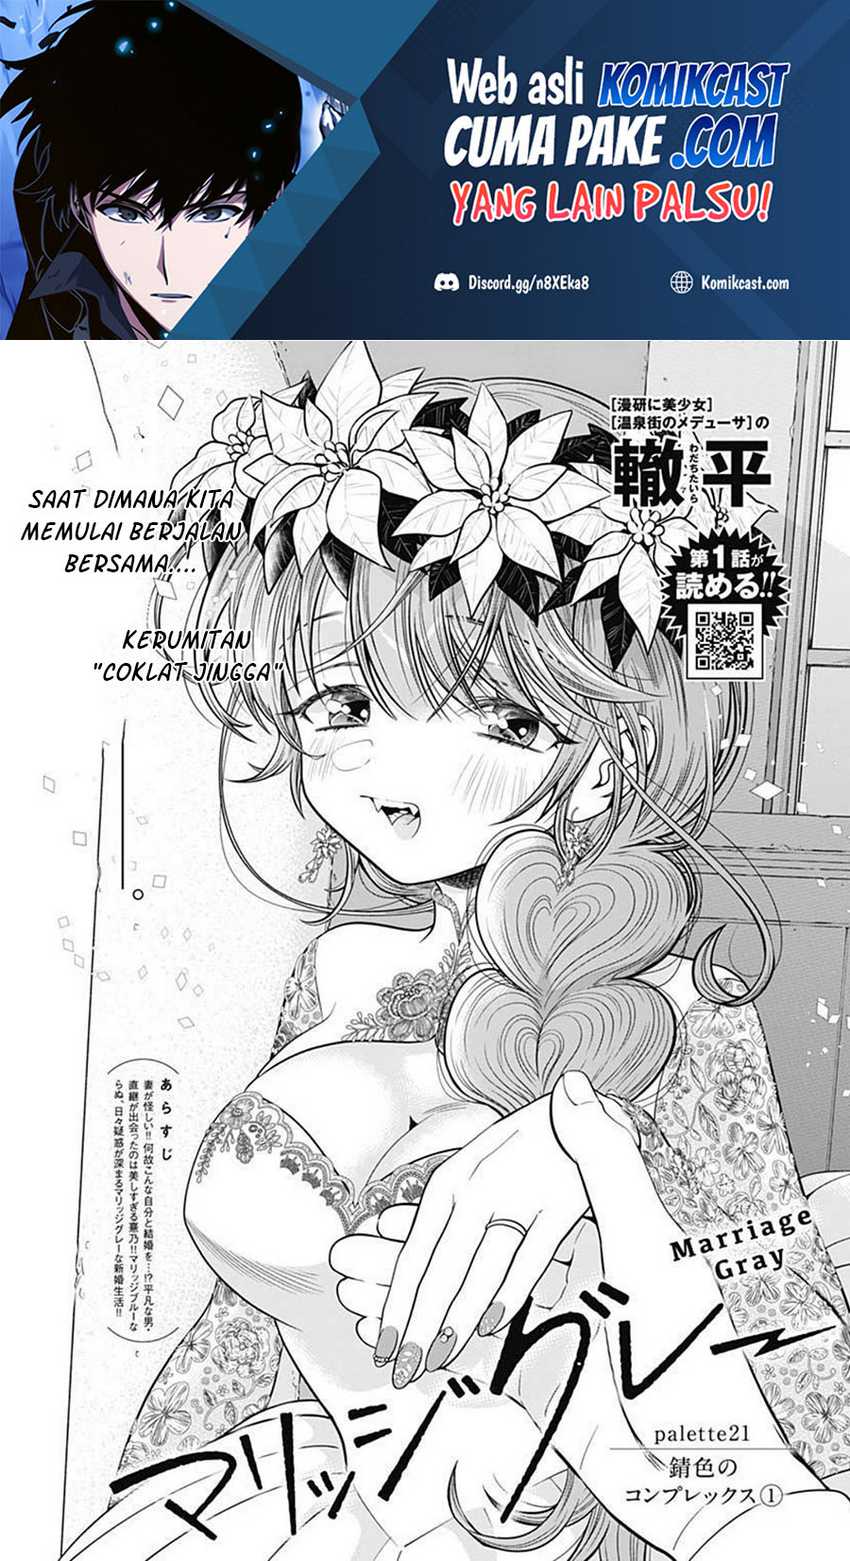 Marriage Gray Chapter 21